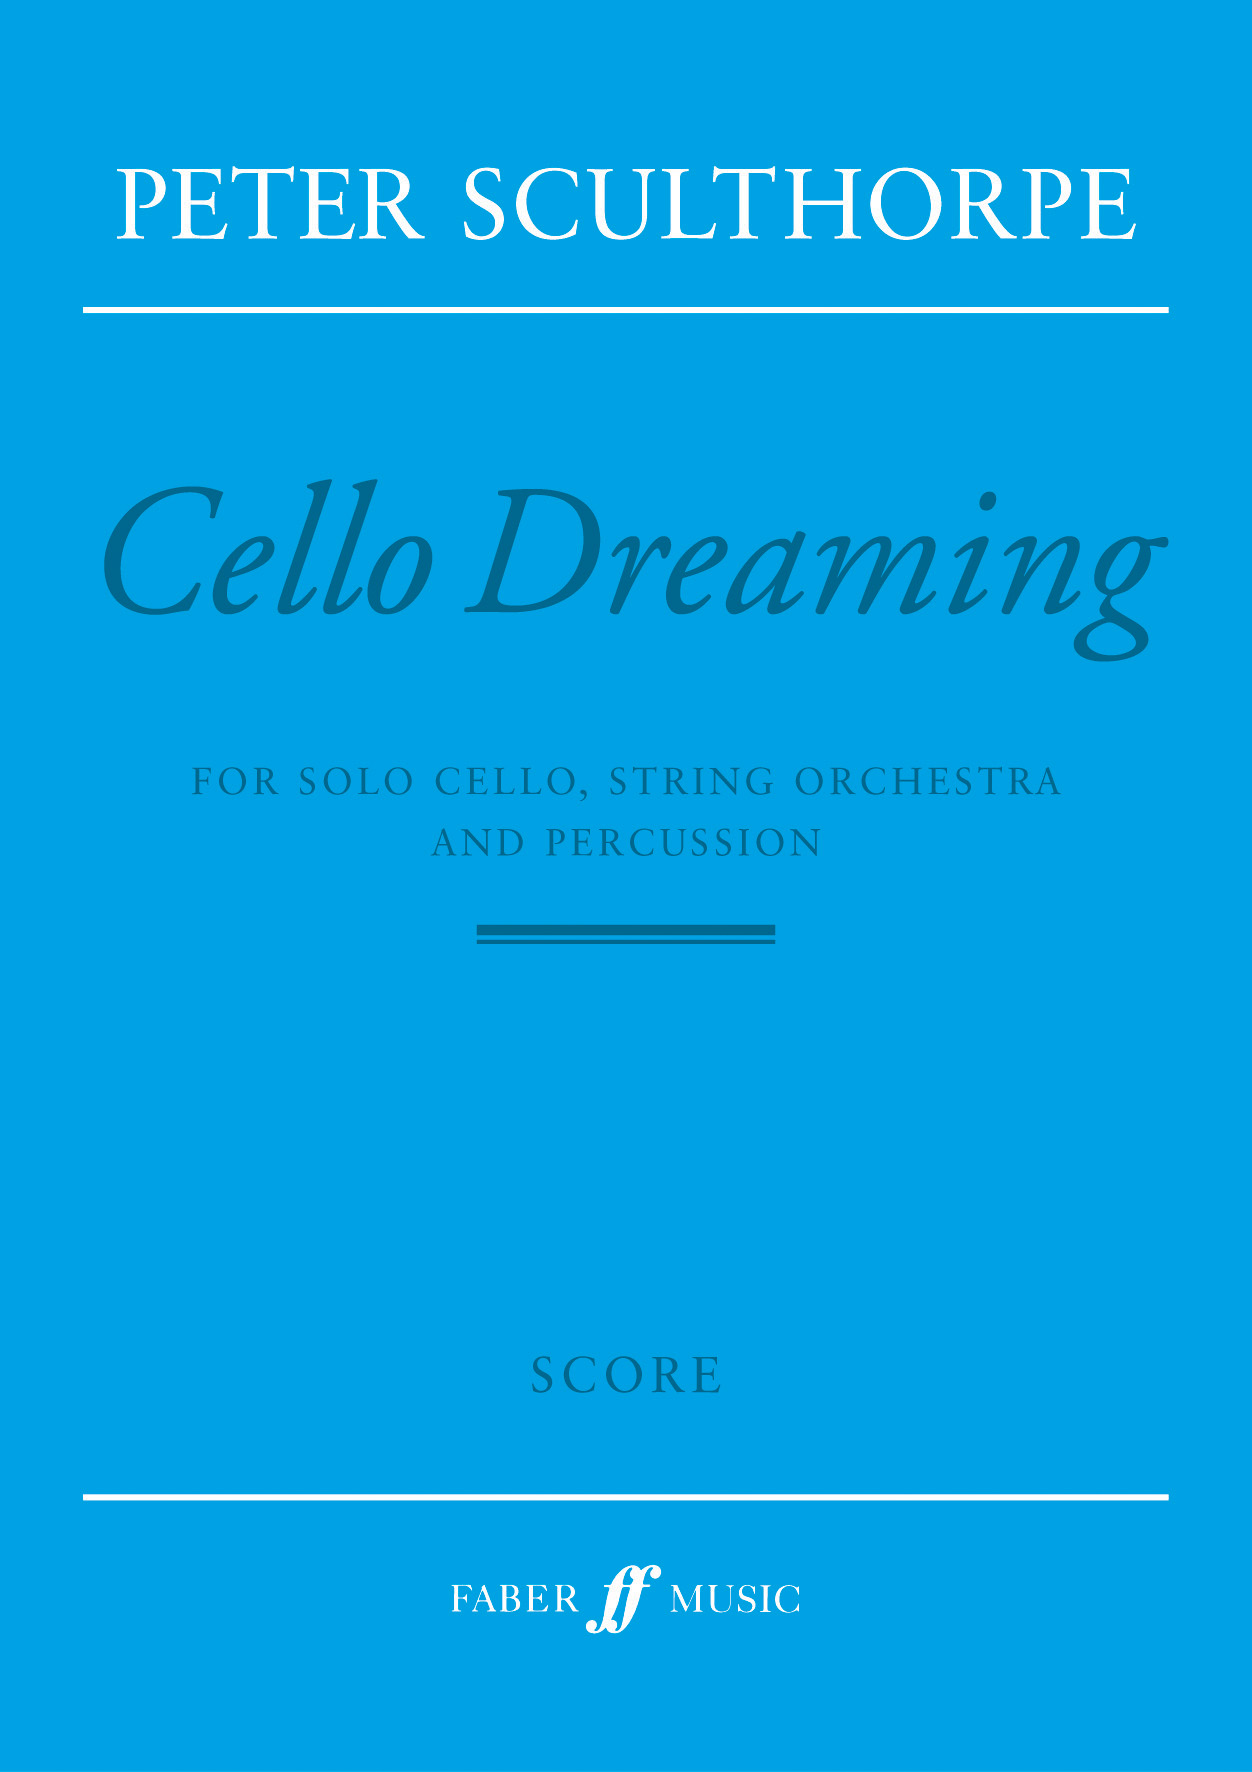 Peter Sculthorpe: Cello Dreaming: Orchestra: Score